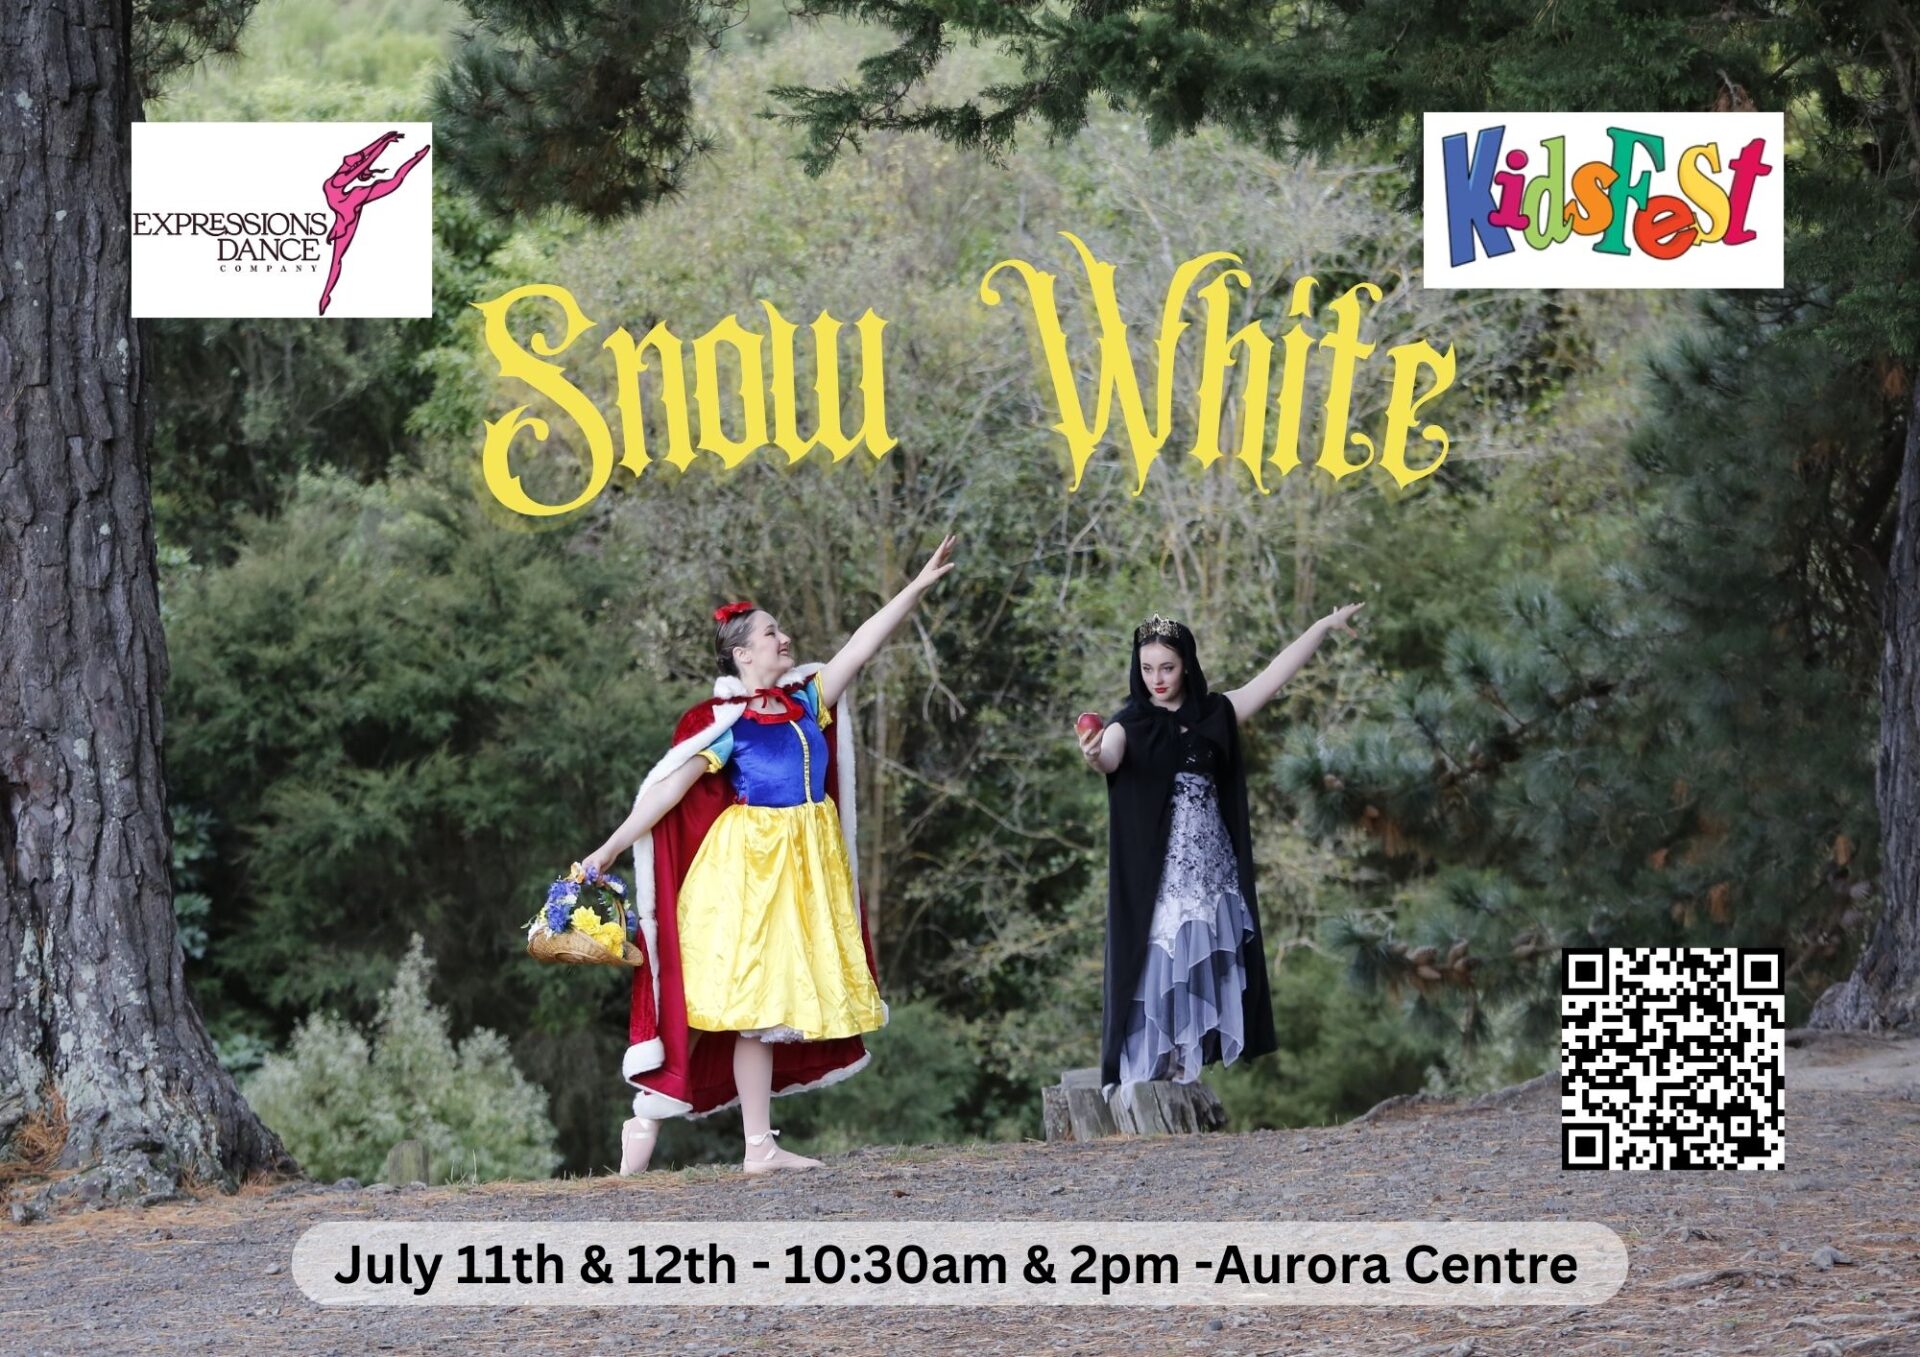 Image of Dance Camp – Snow White event